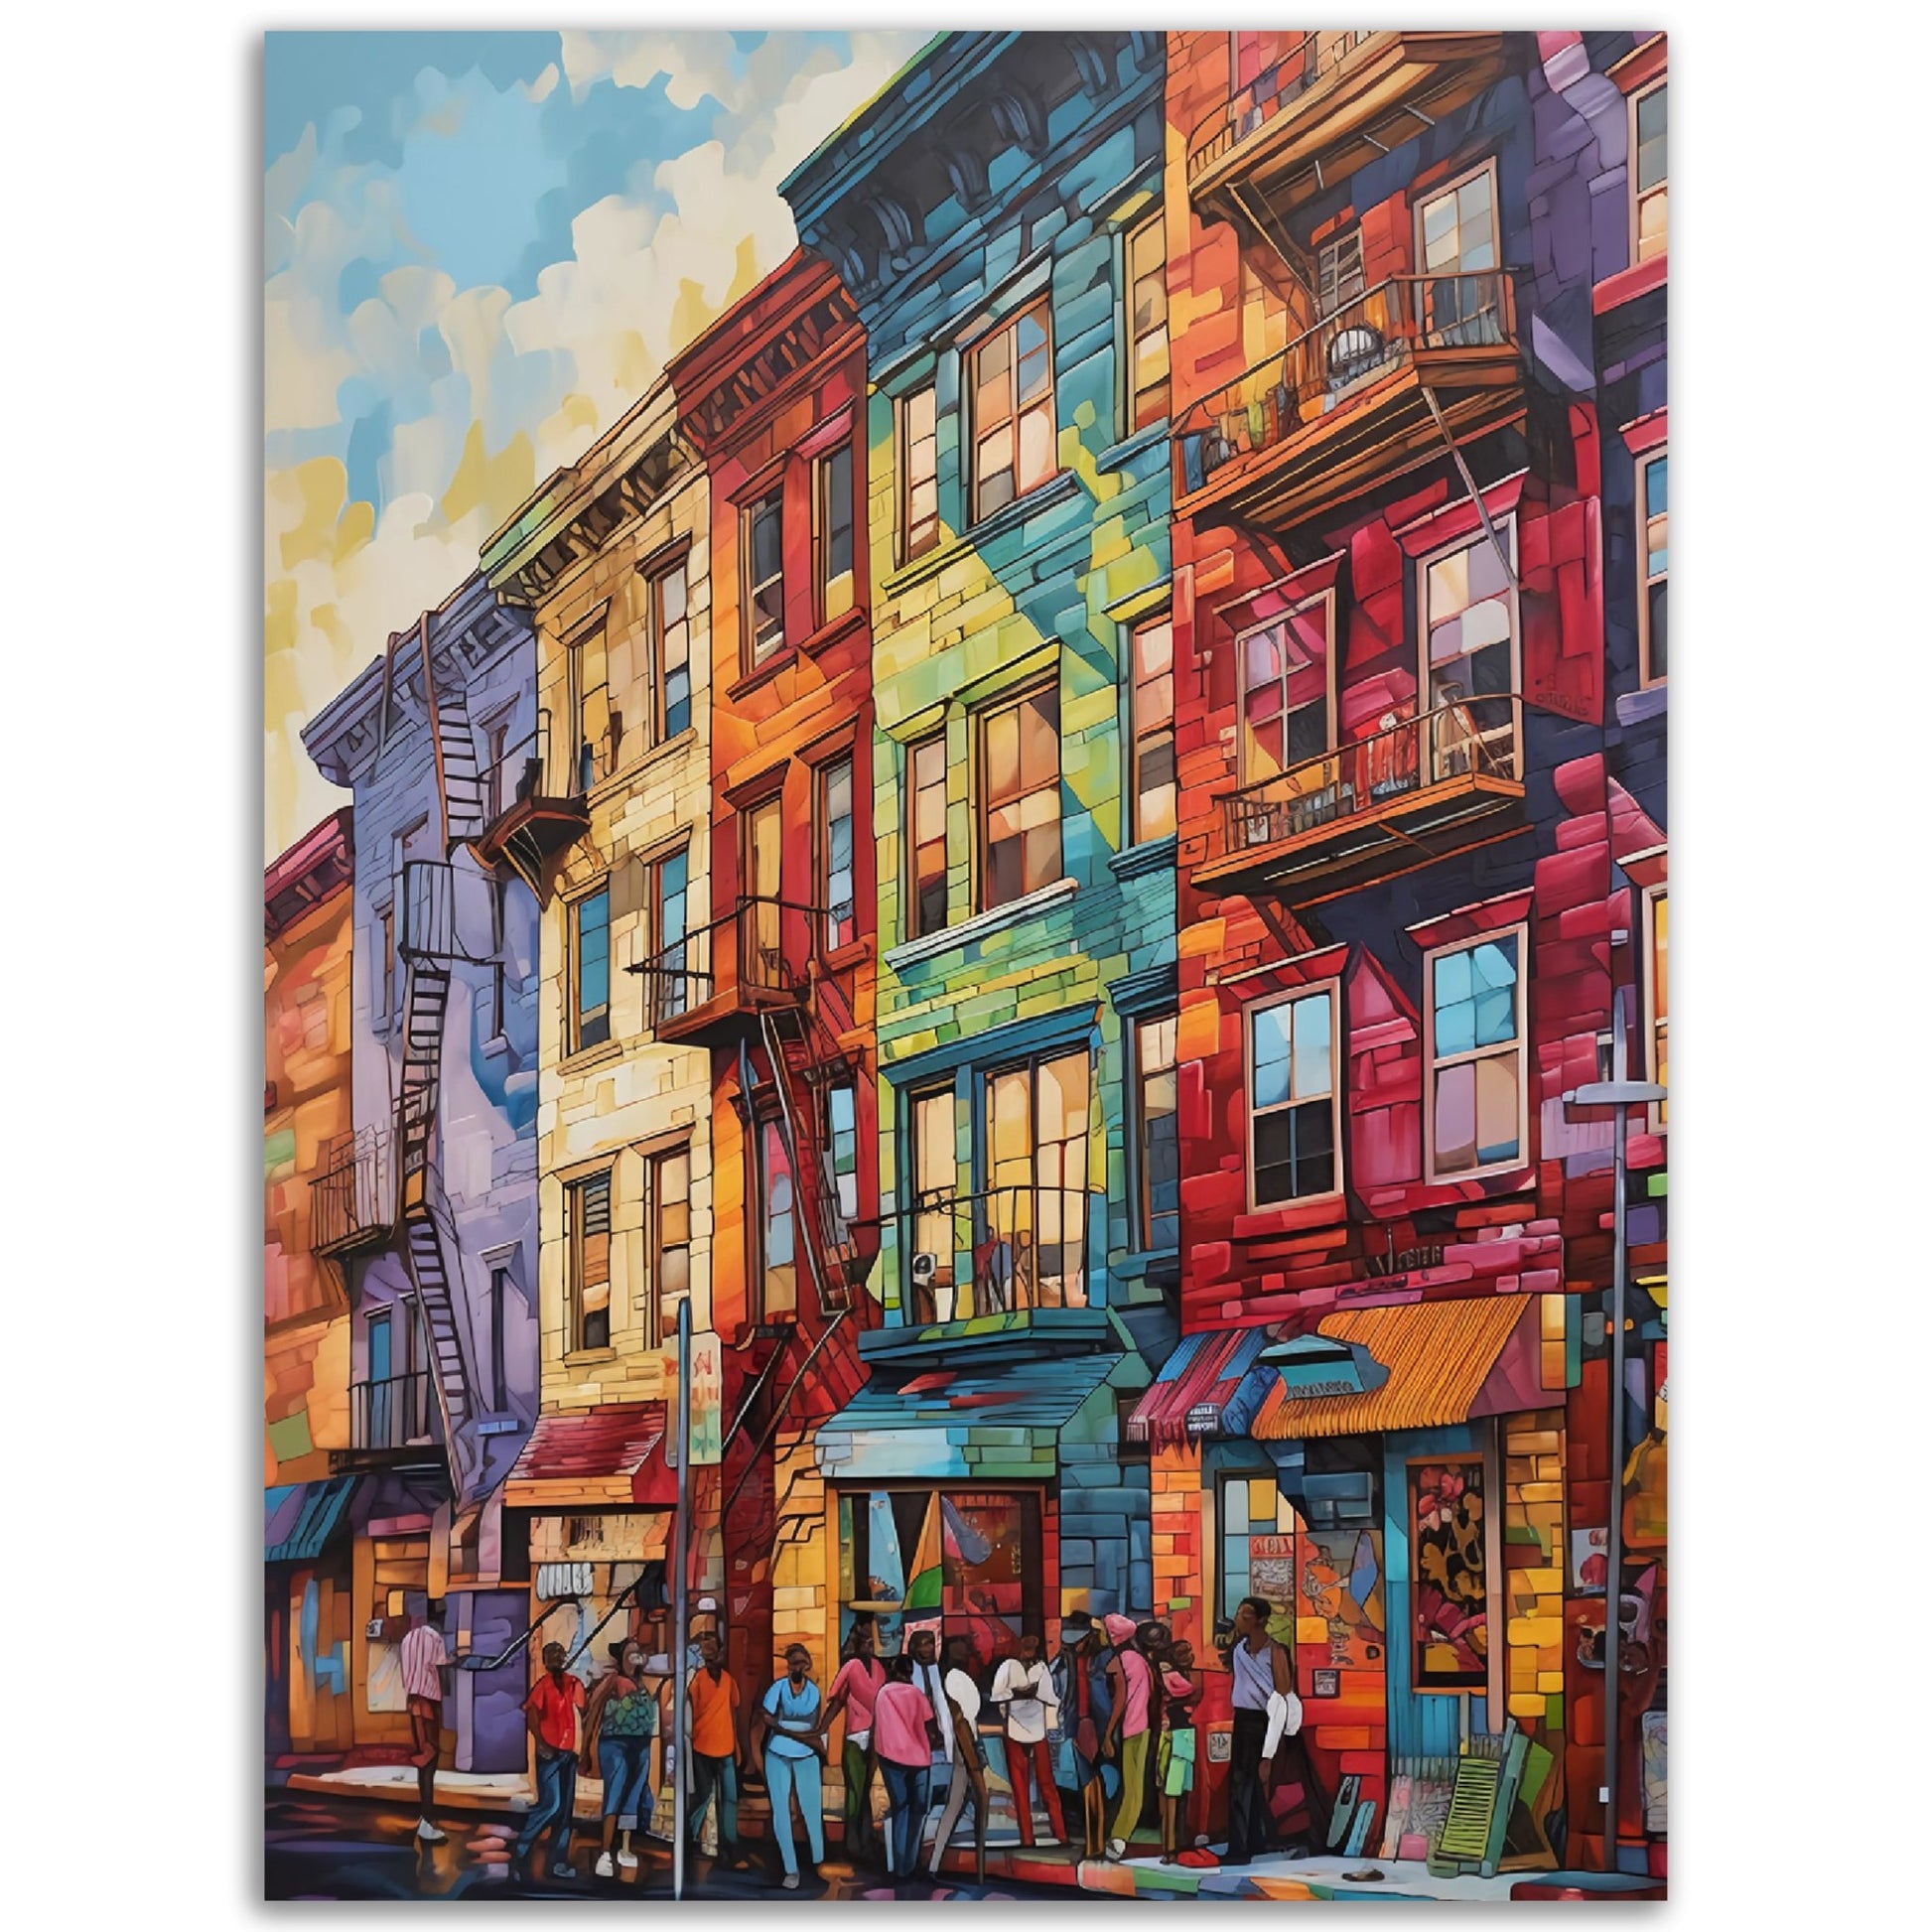 A Pop Art Community poster of colorful buildings on a street.